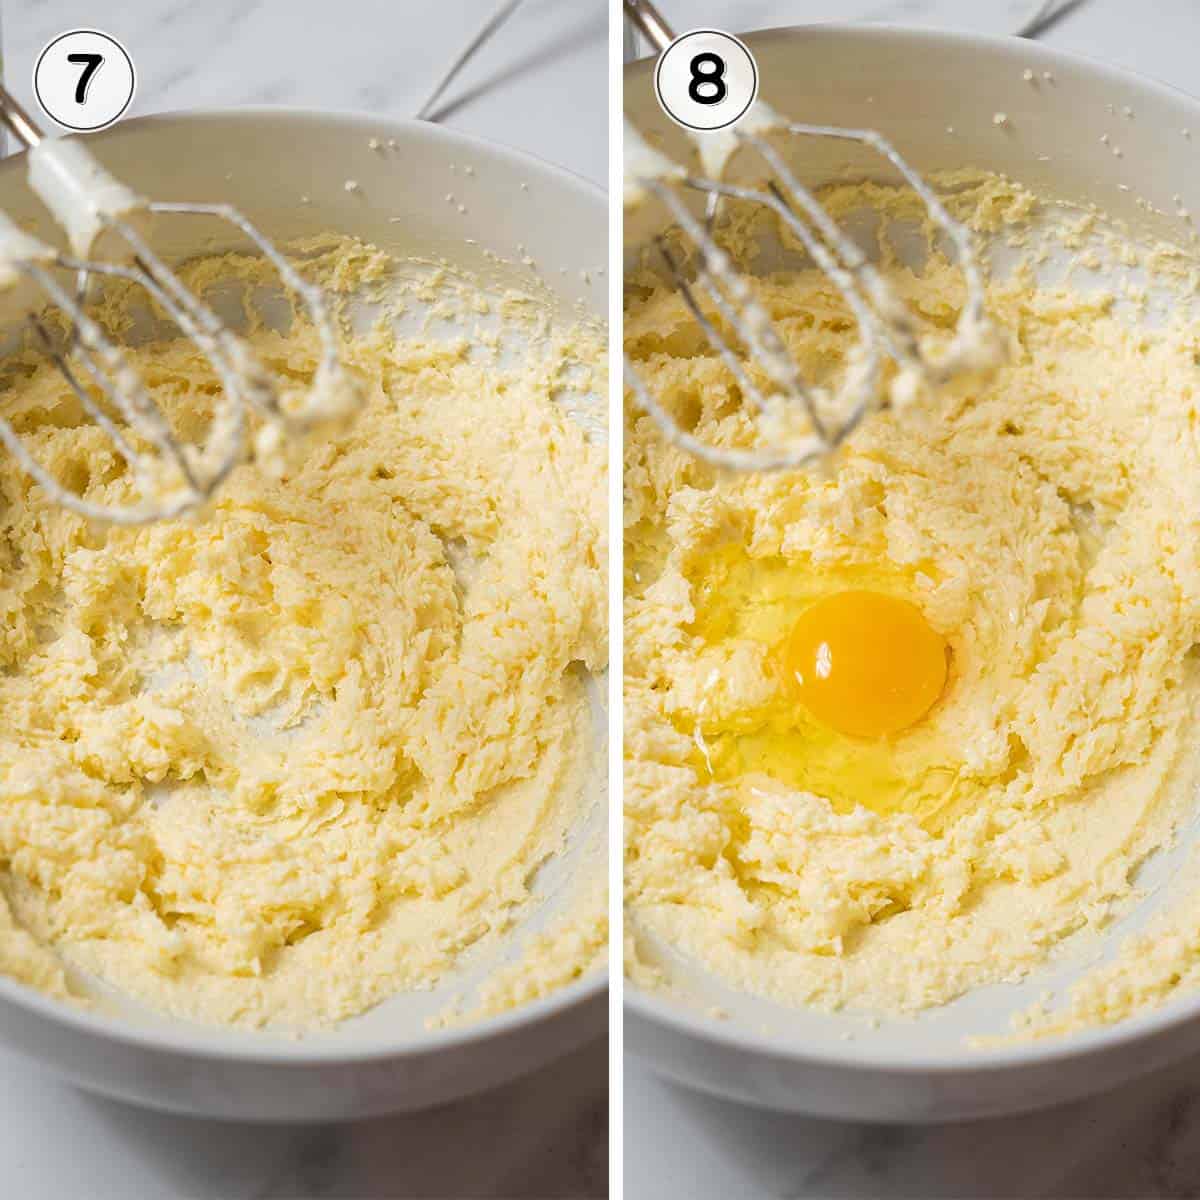 beating the butter and sugar and adding the eggs.